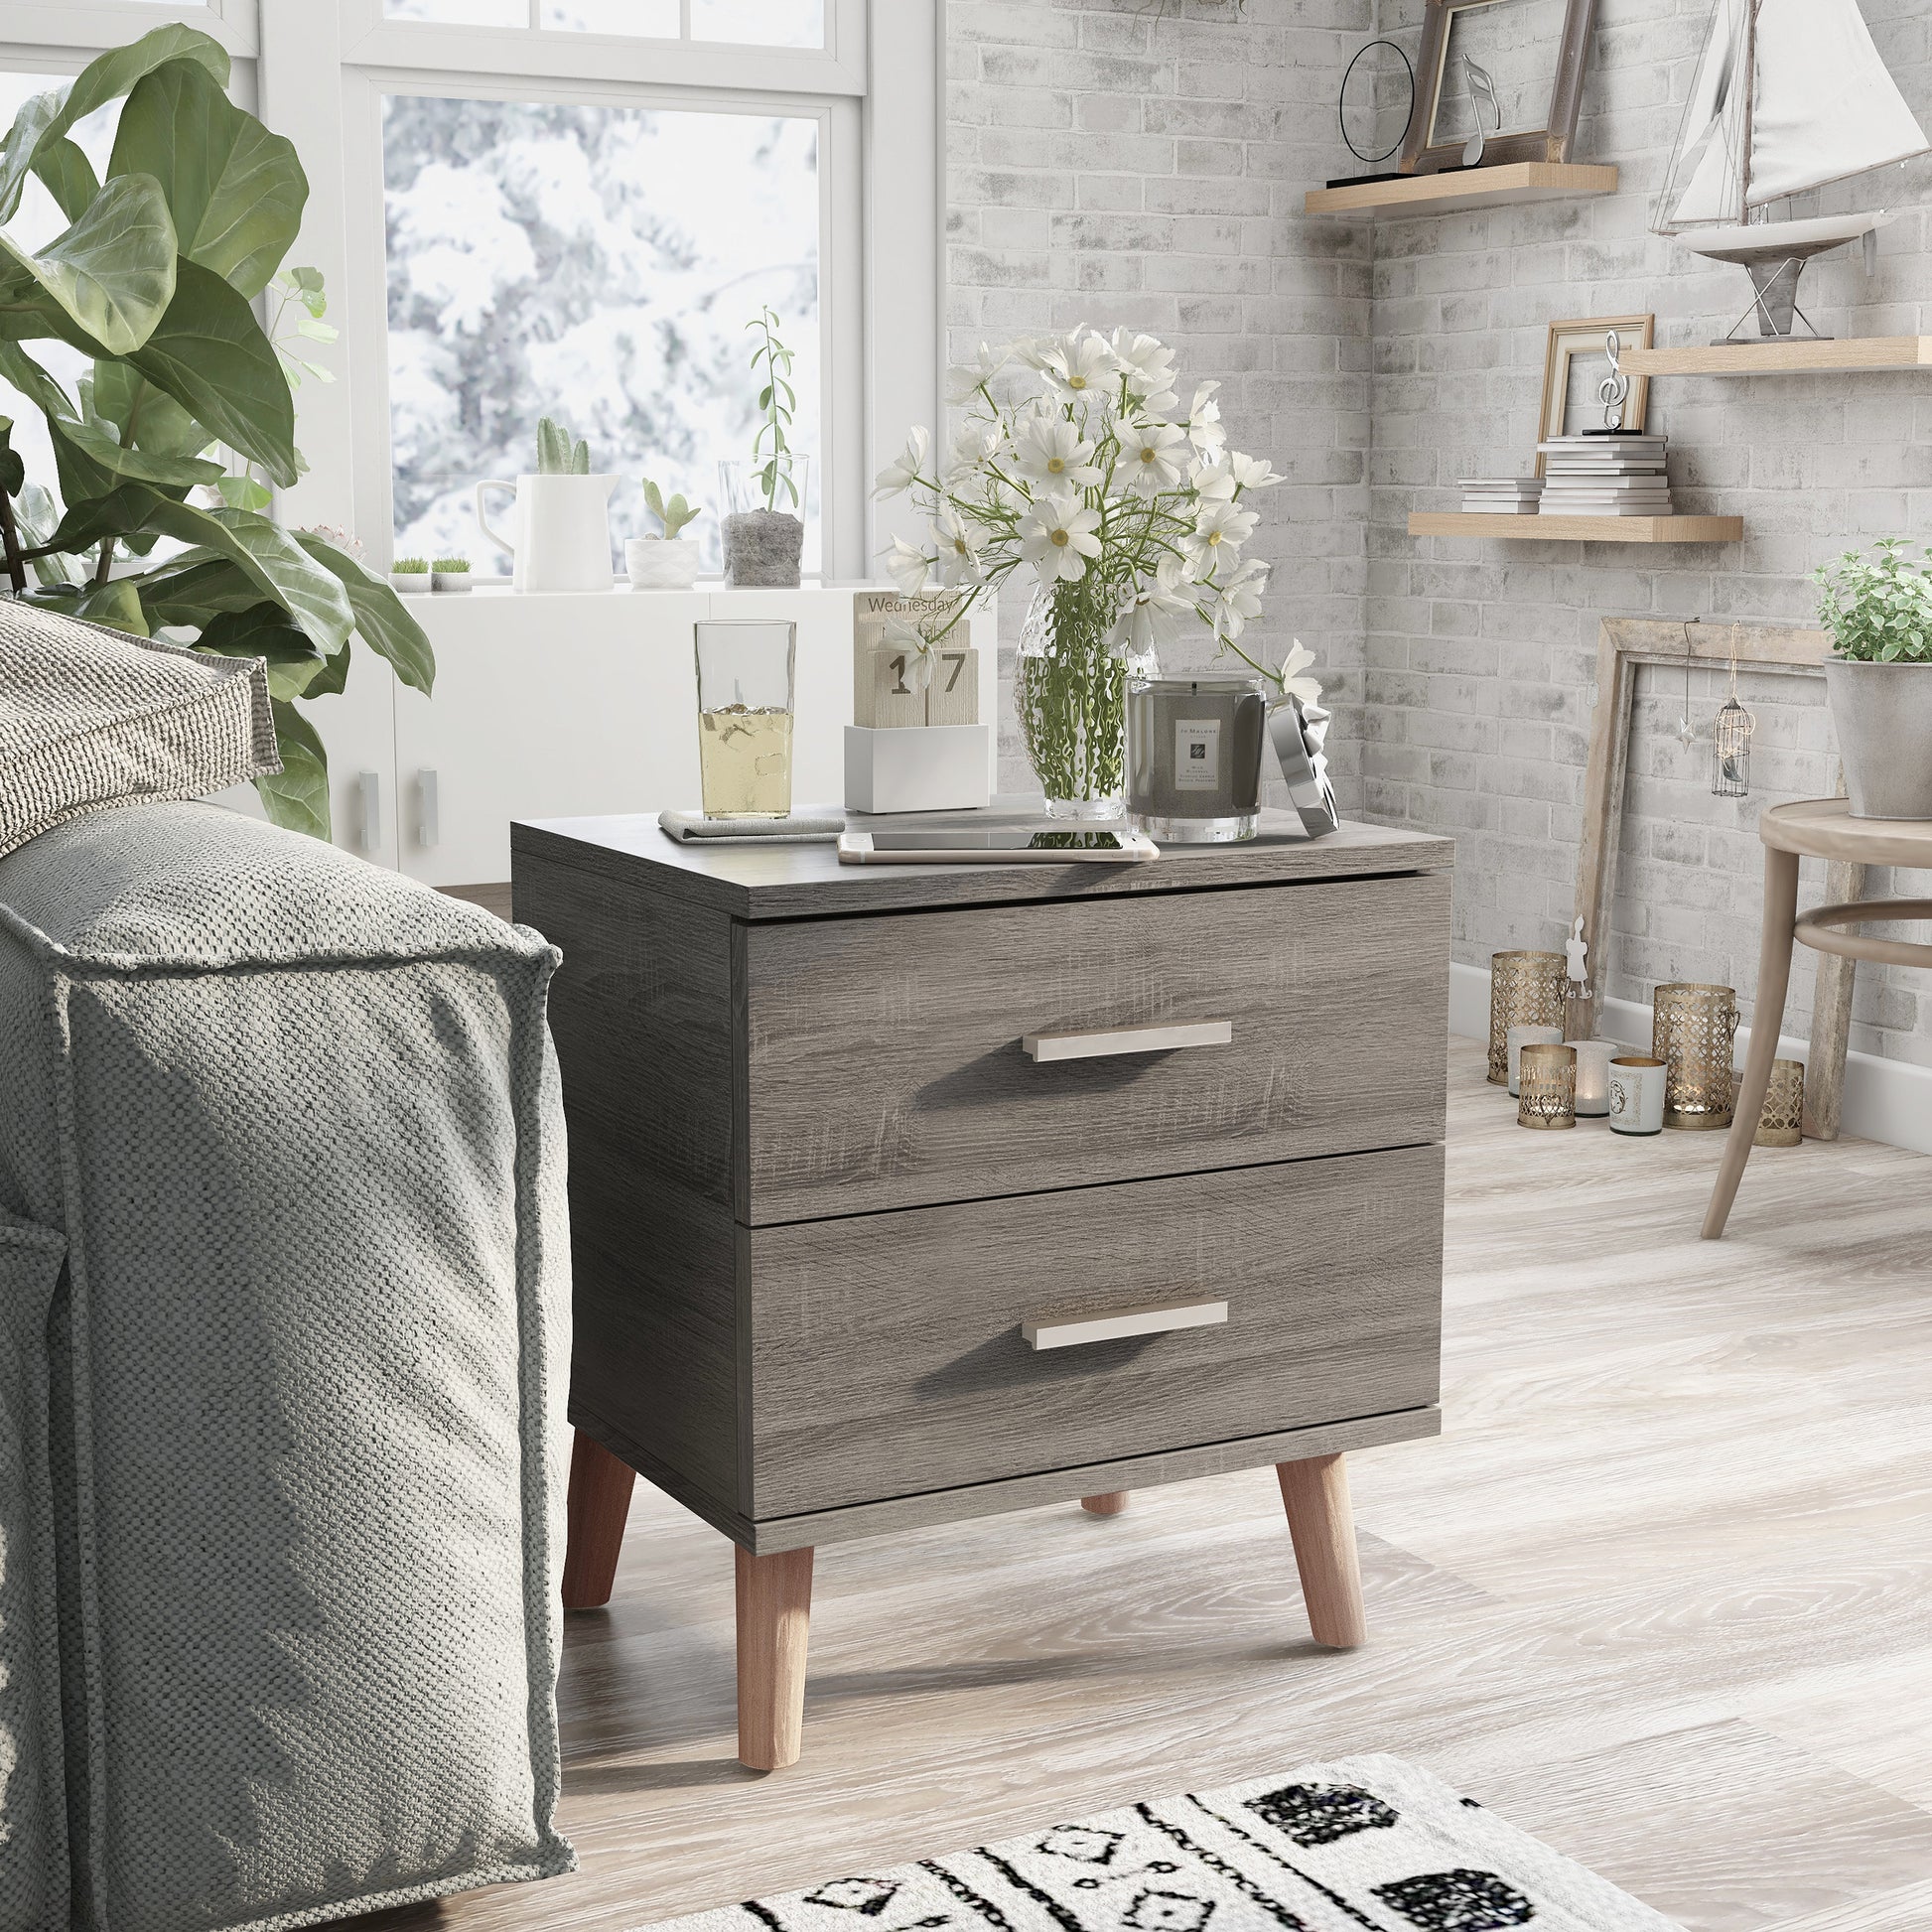 Right angled mid-century modern distressed gray two-drawer nightstand in a living area with accessories